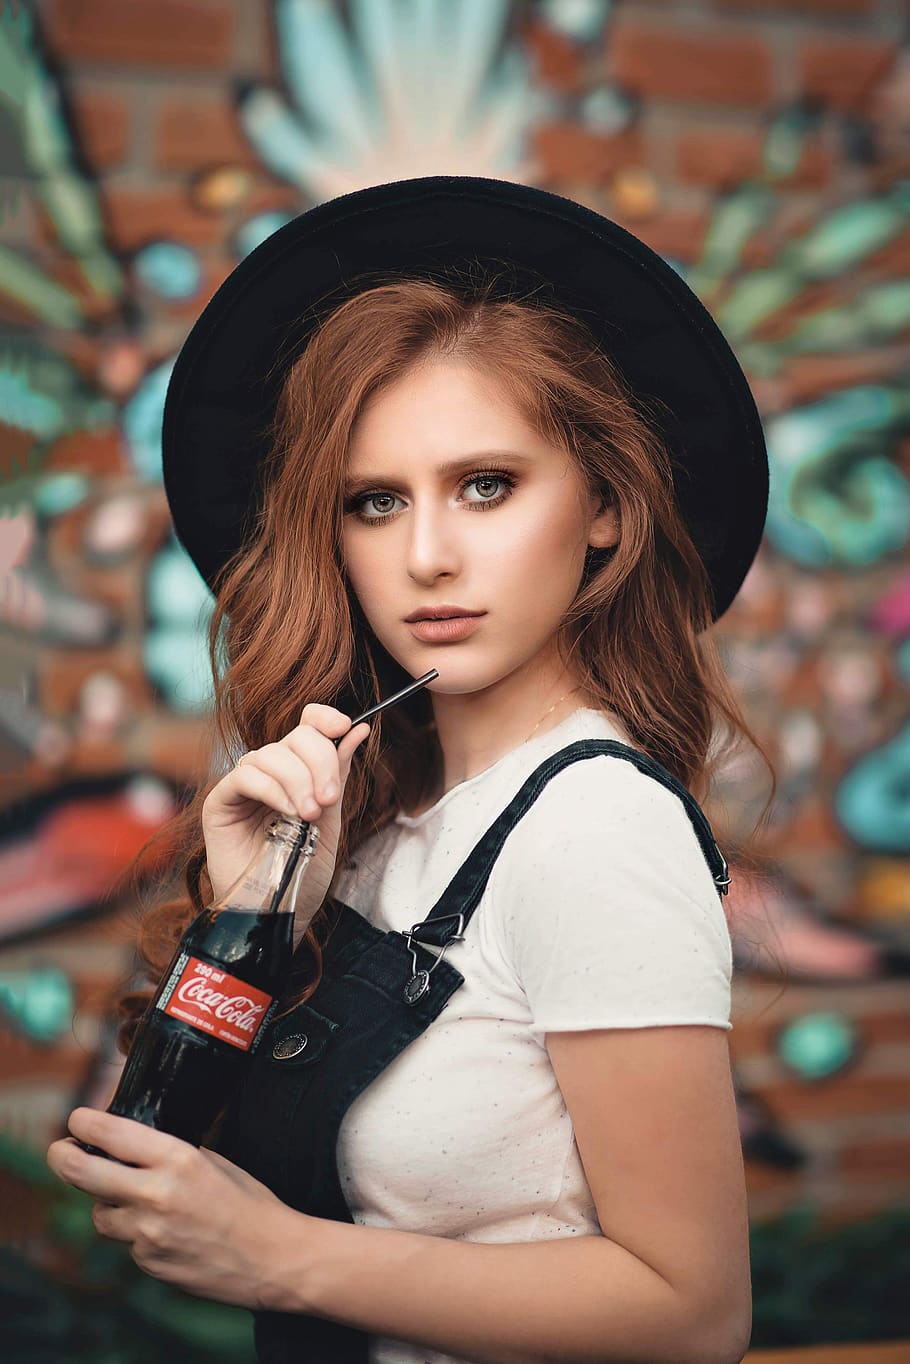 Woman in Black Hat and White Shirt Holding Coca-cola Bottle, adolescent, HD wallpaper